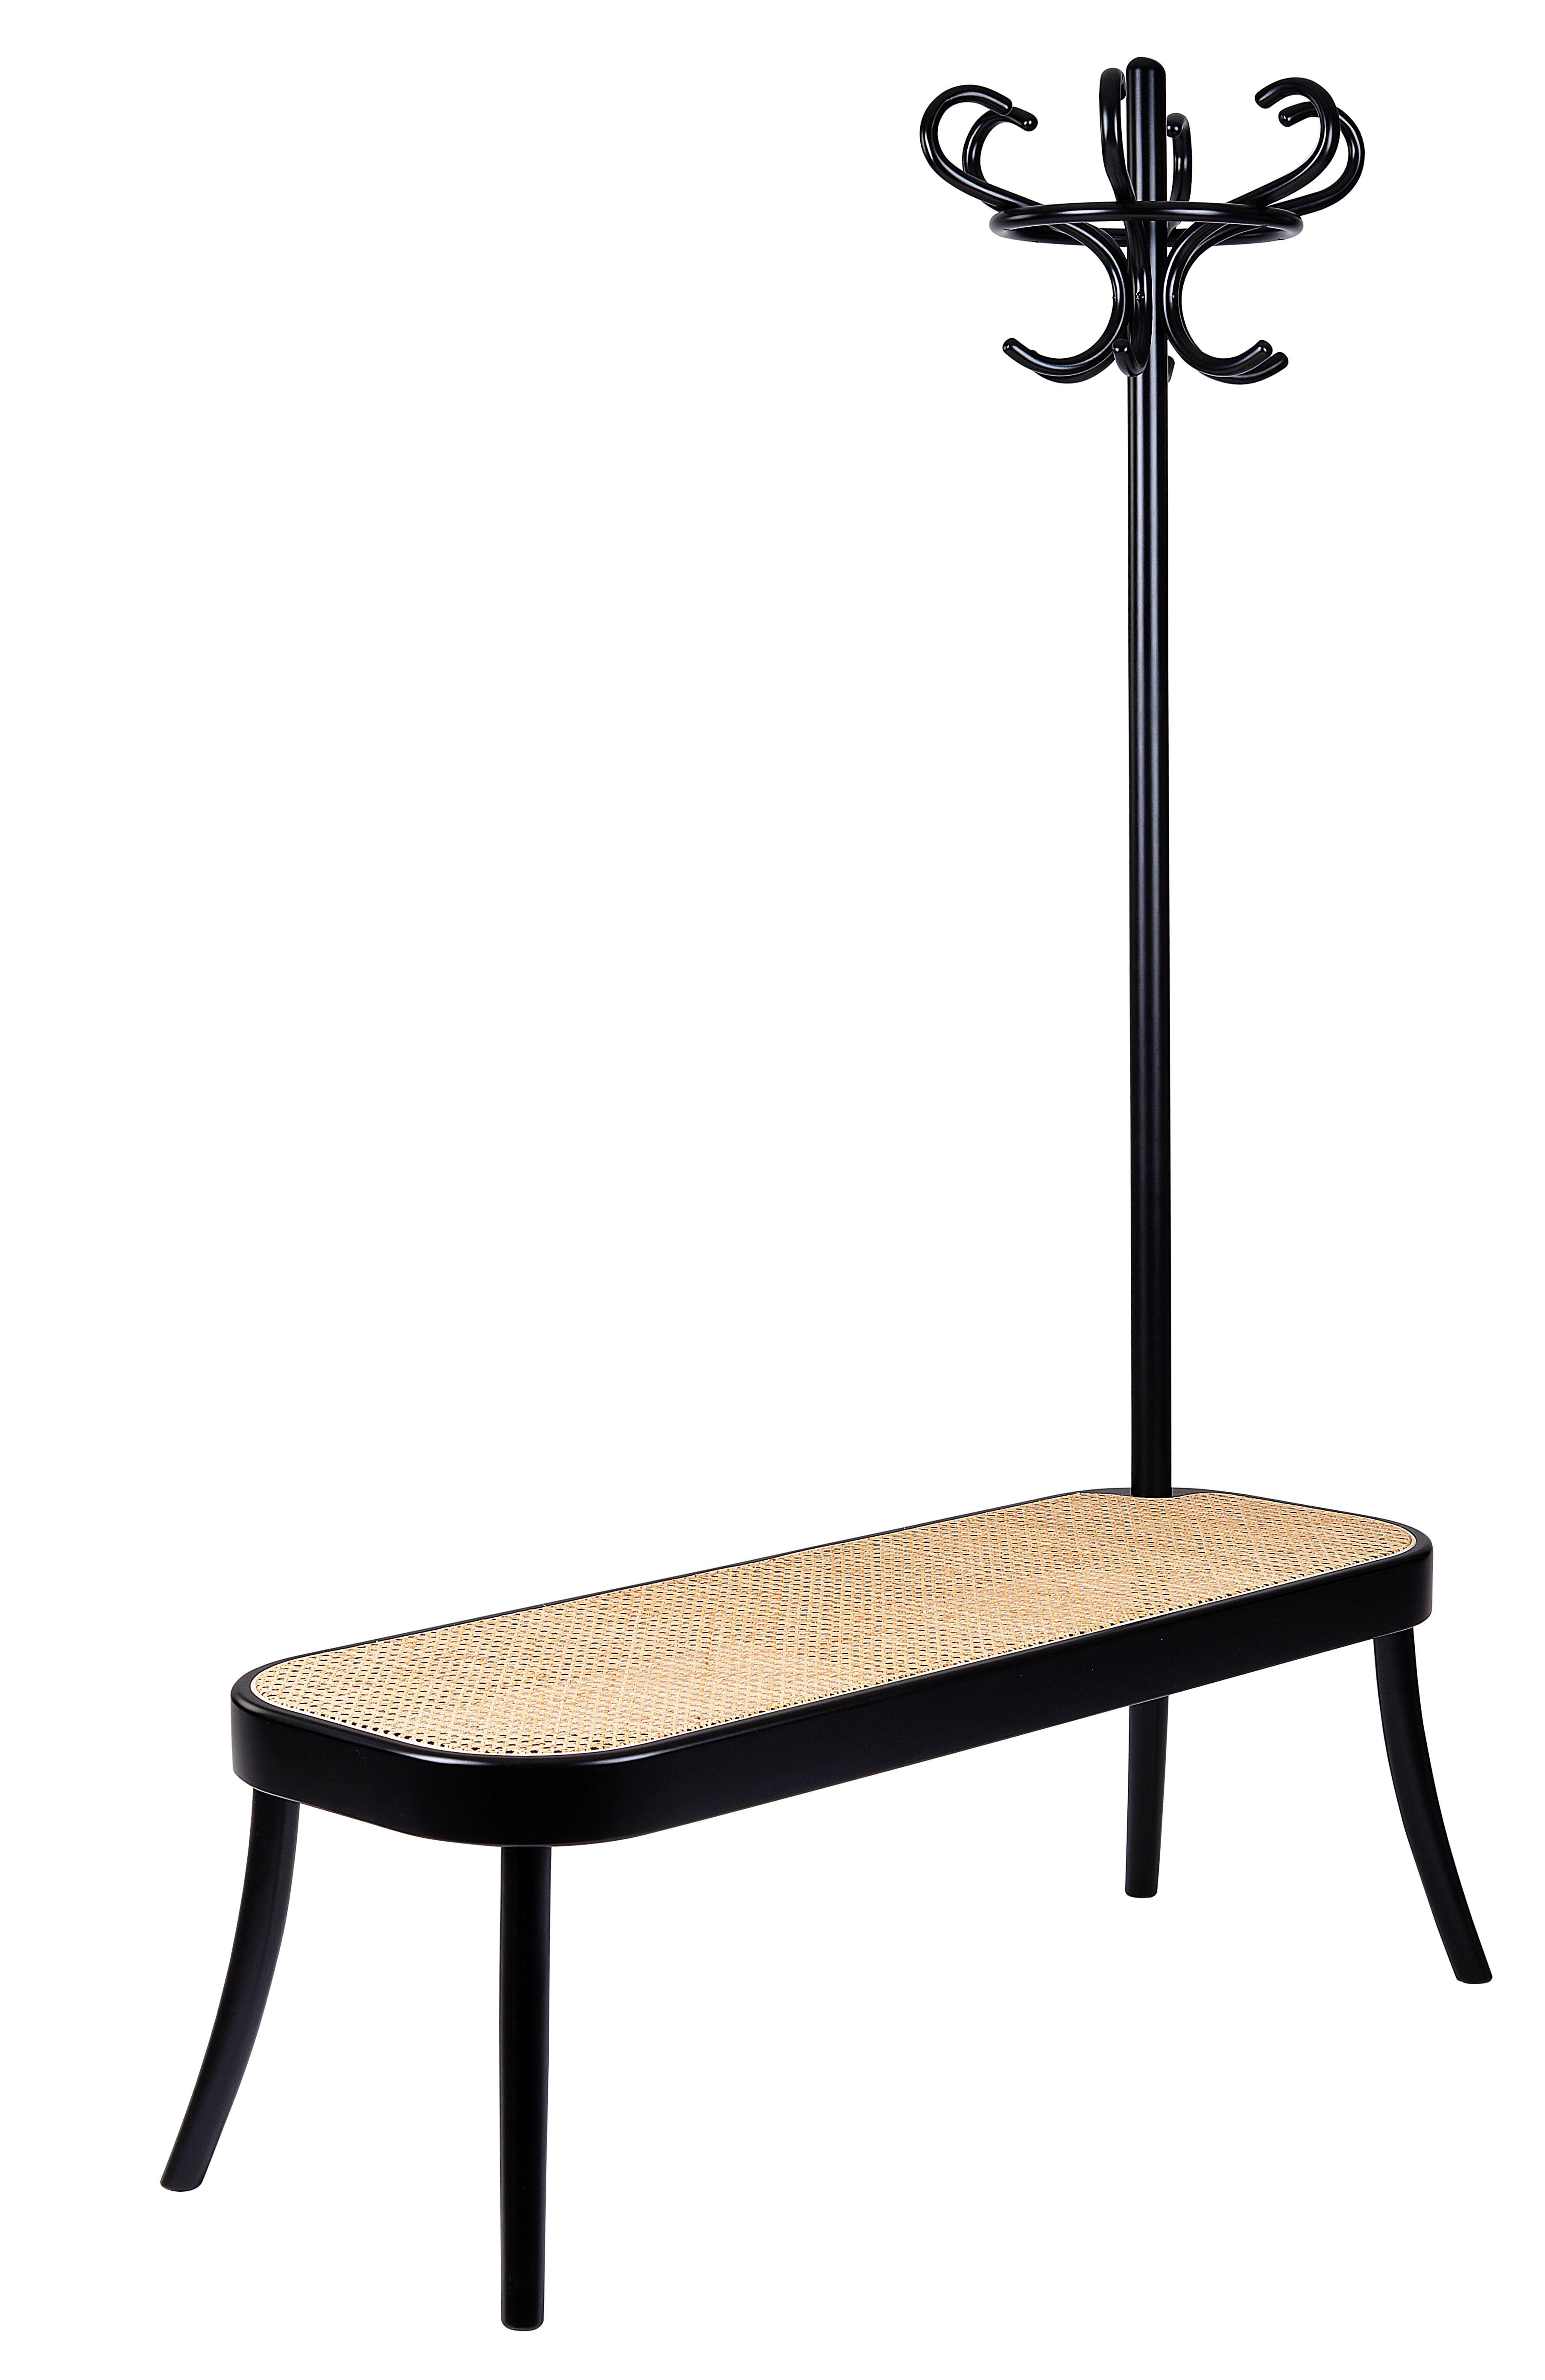 The two Swedish designers able to give a poetic and innovative touch to materials at the same time, have come up with Coat Rack Bench for the Wiener GTV Design 2014 collection, a coat rack bench that plays with the company’s stylistic features: bent